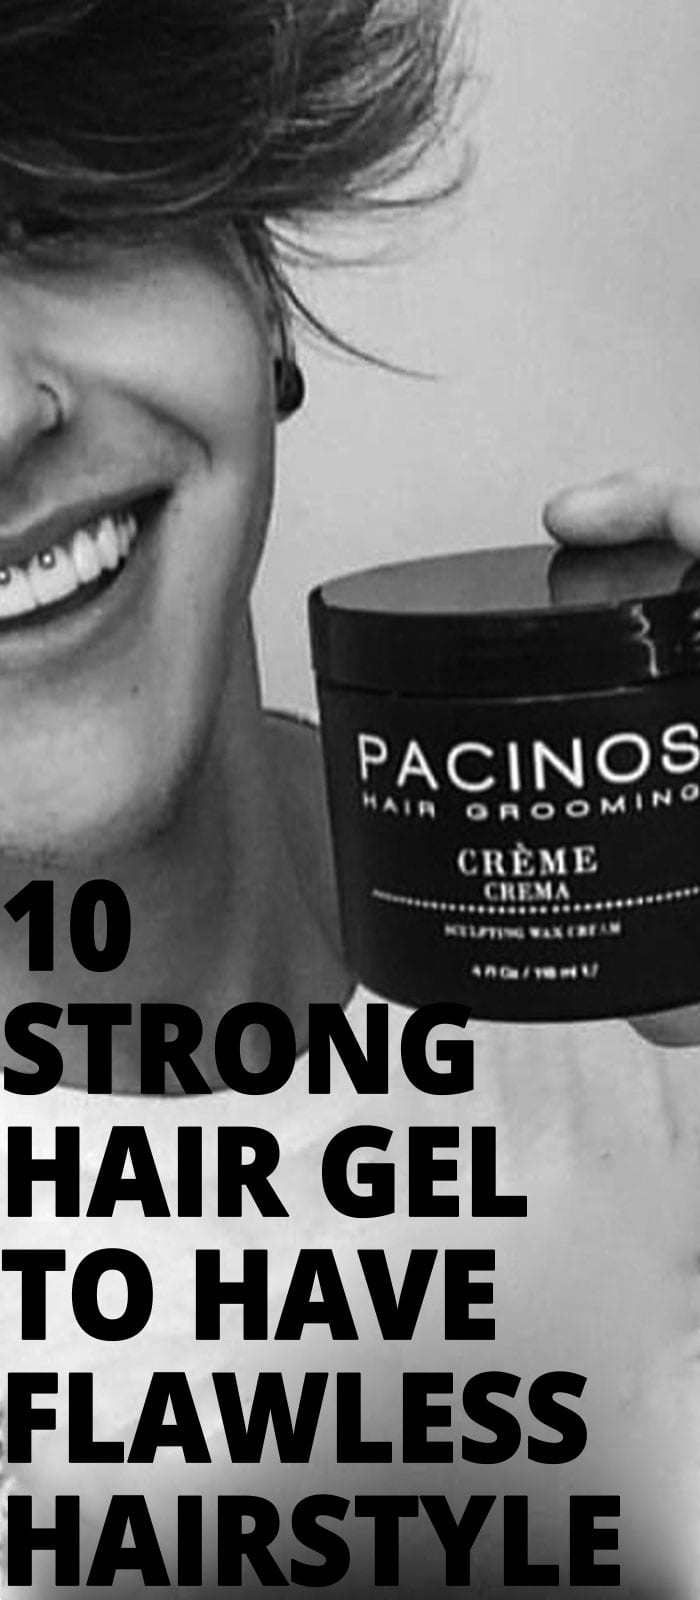 STRONG-HAIR-GEL-TO-HAVE-FLAWLESS-HAIRSTYLE-